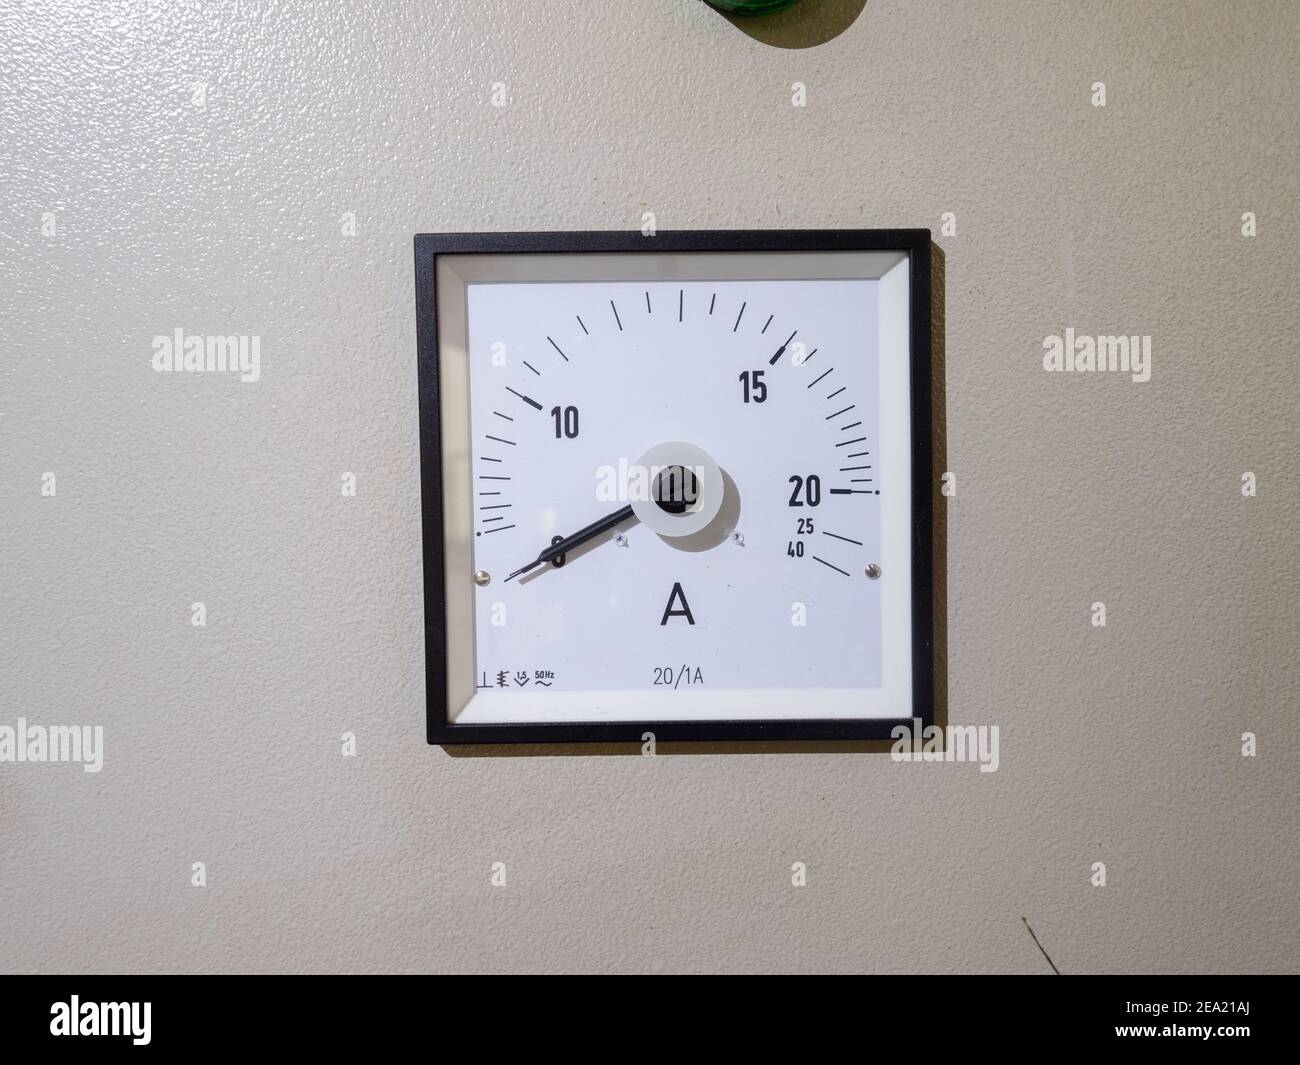 Electrical appliance analog ammeter. Control panel with analog ammeter devices. Stock Photo